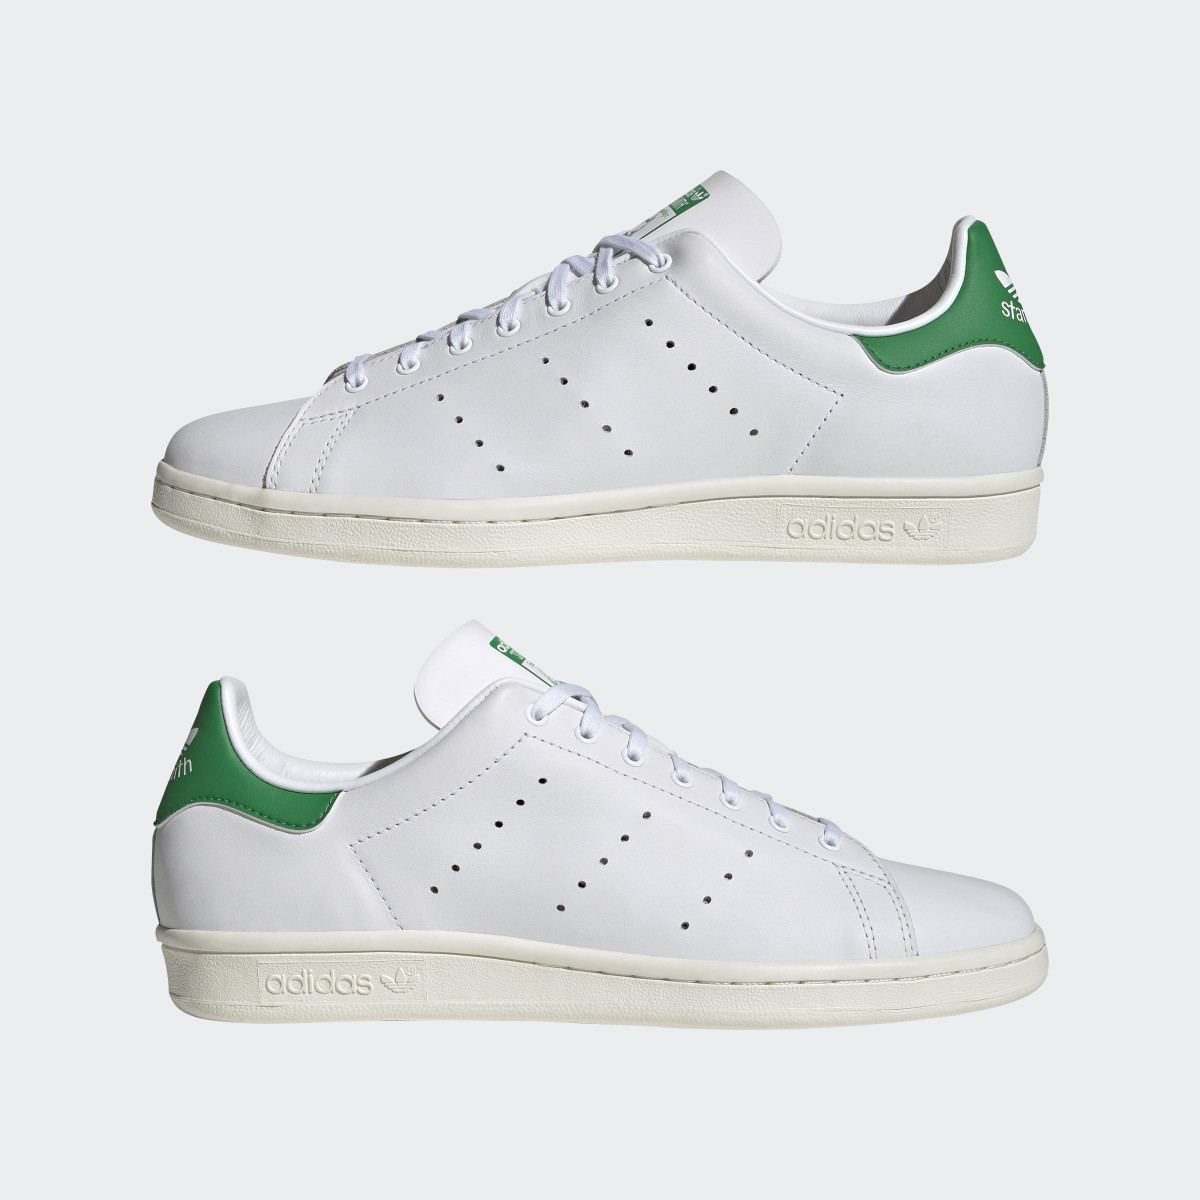 Adidas Stan Smith 80s Shoes. 8